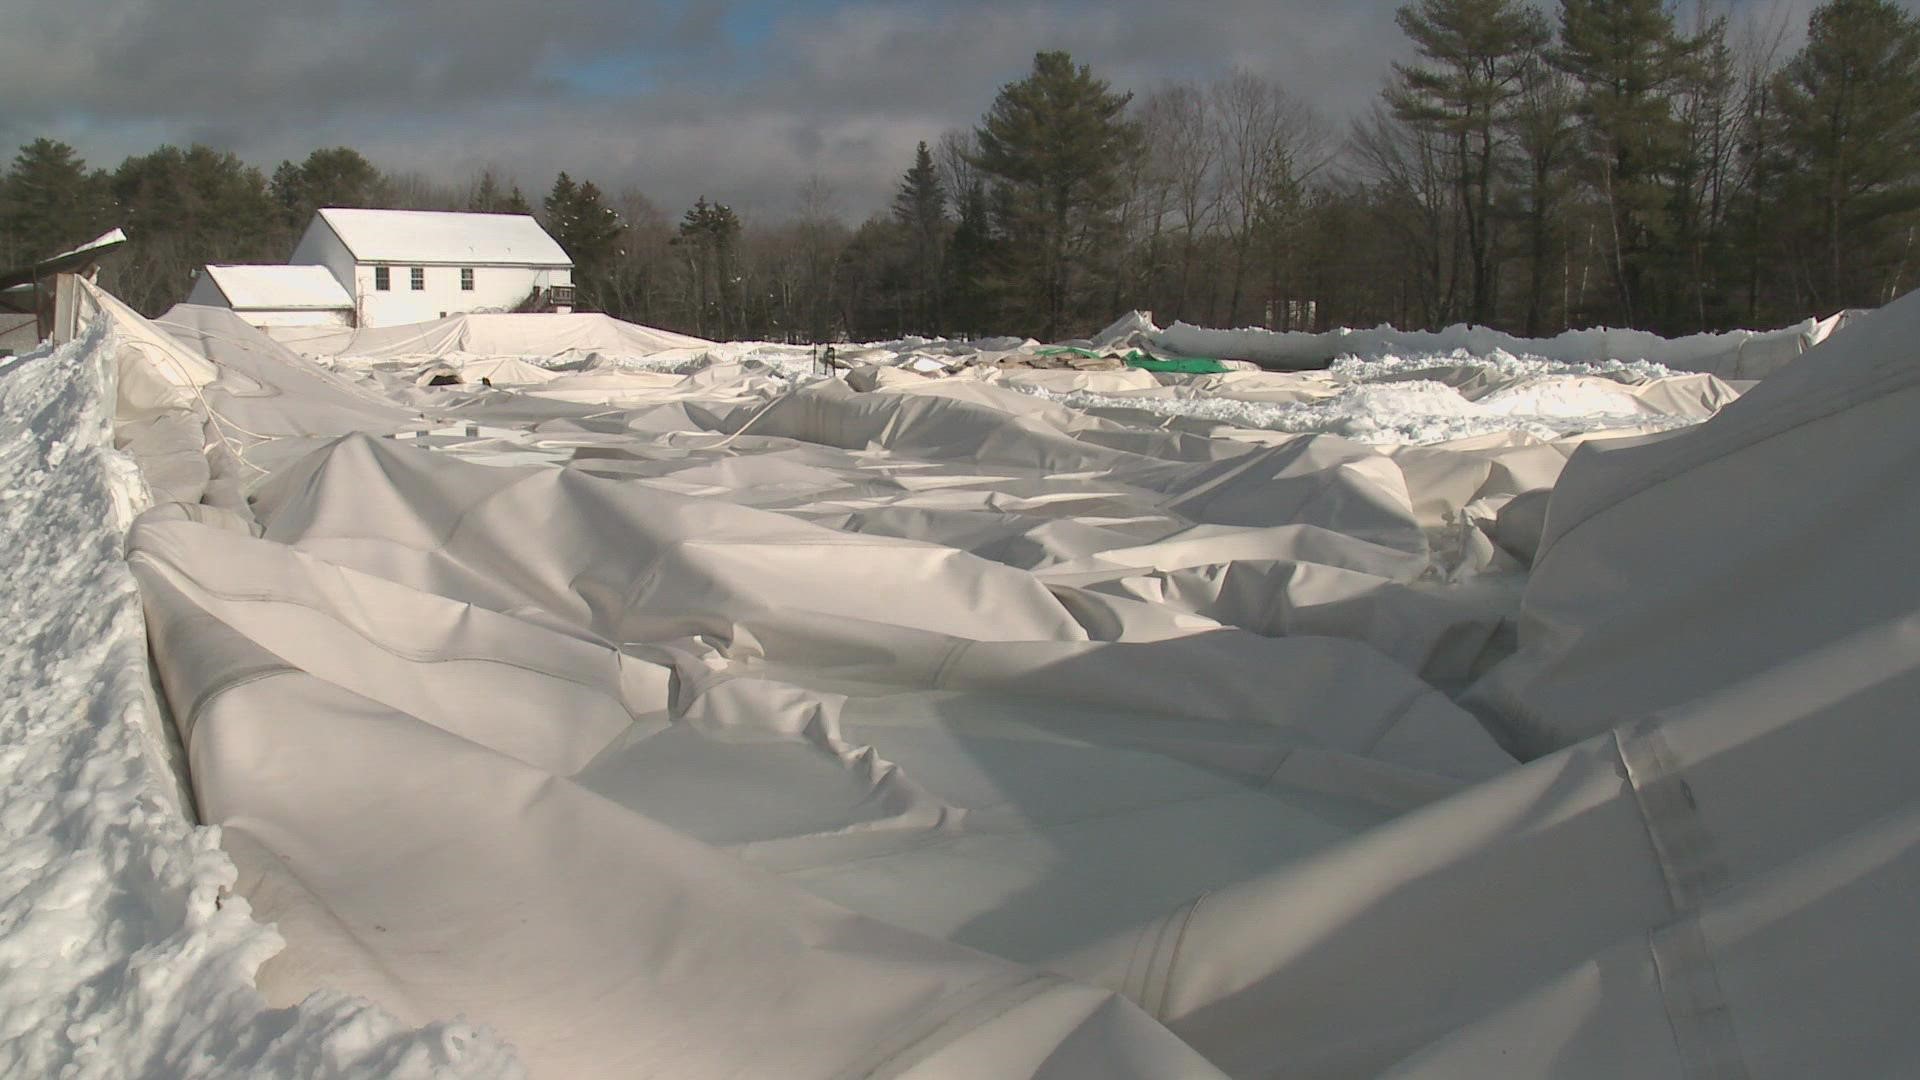 The recent storms dumped a significant volume of heavy and wet snow, causing both domes to collapse under the weight.